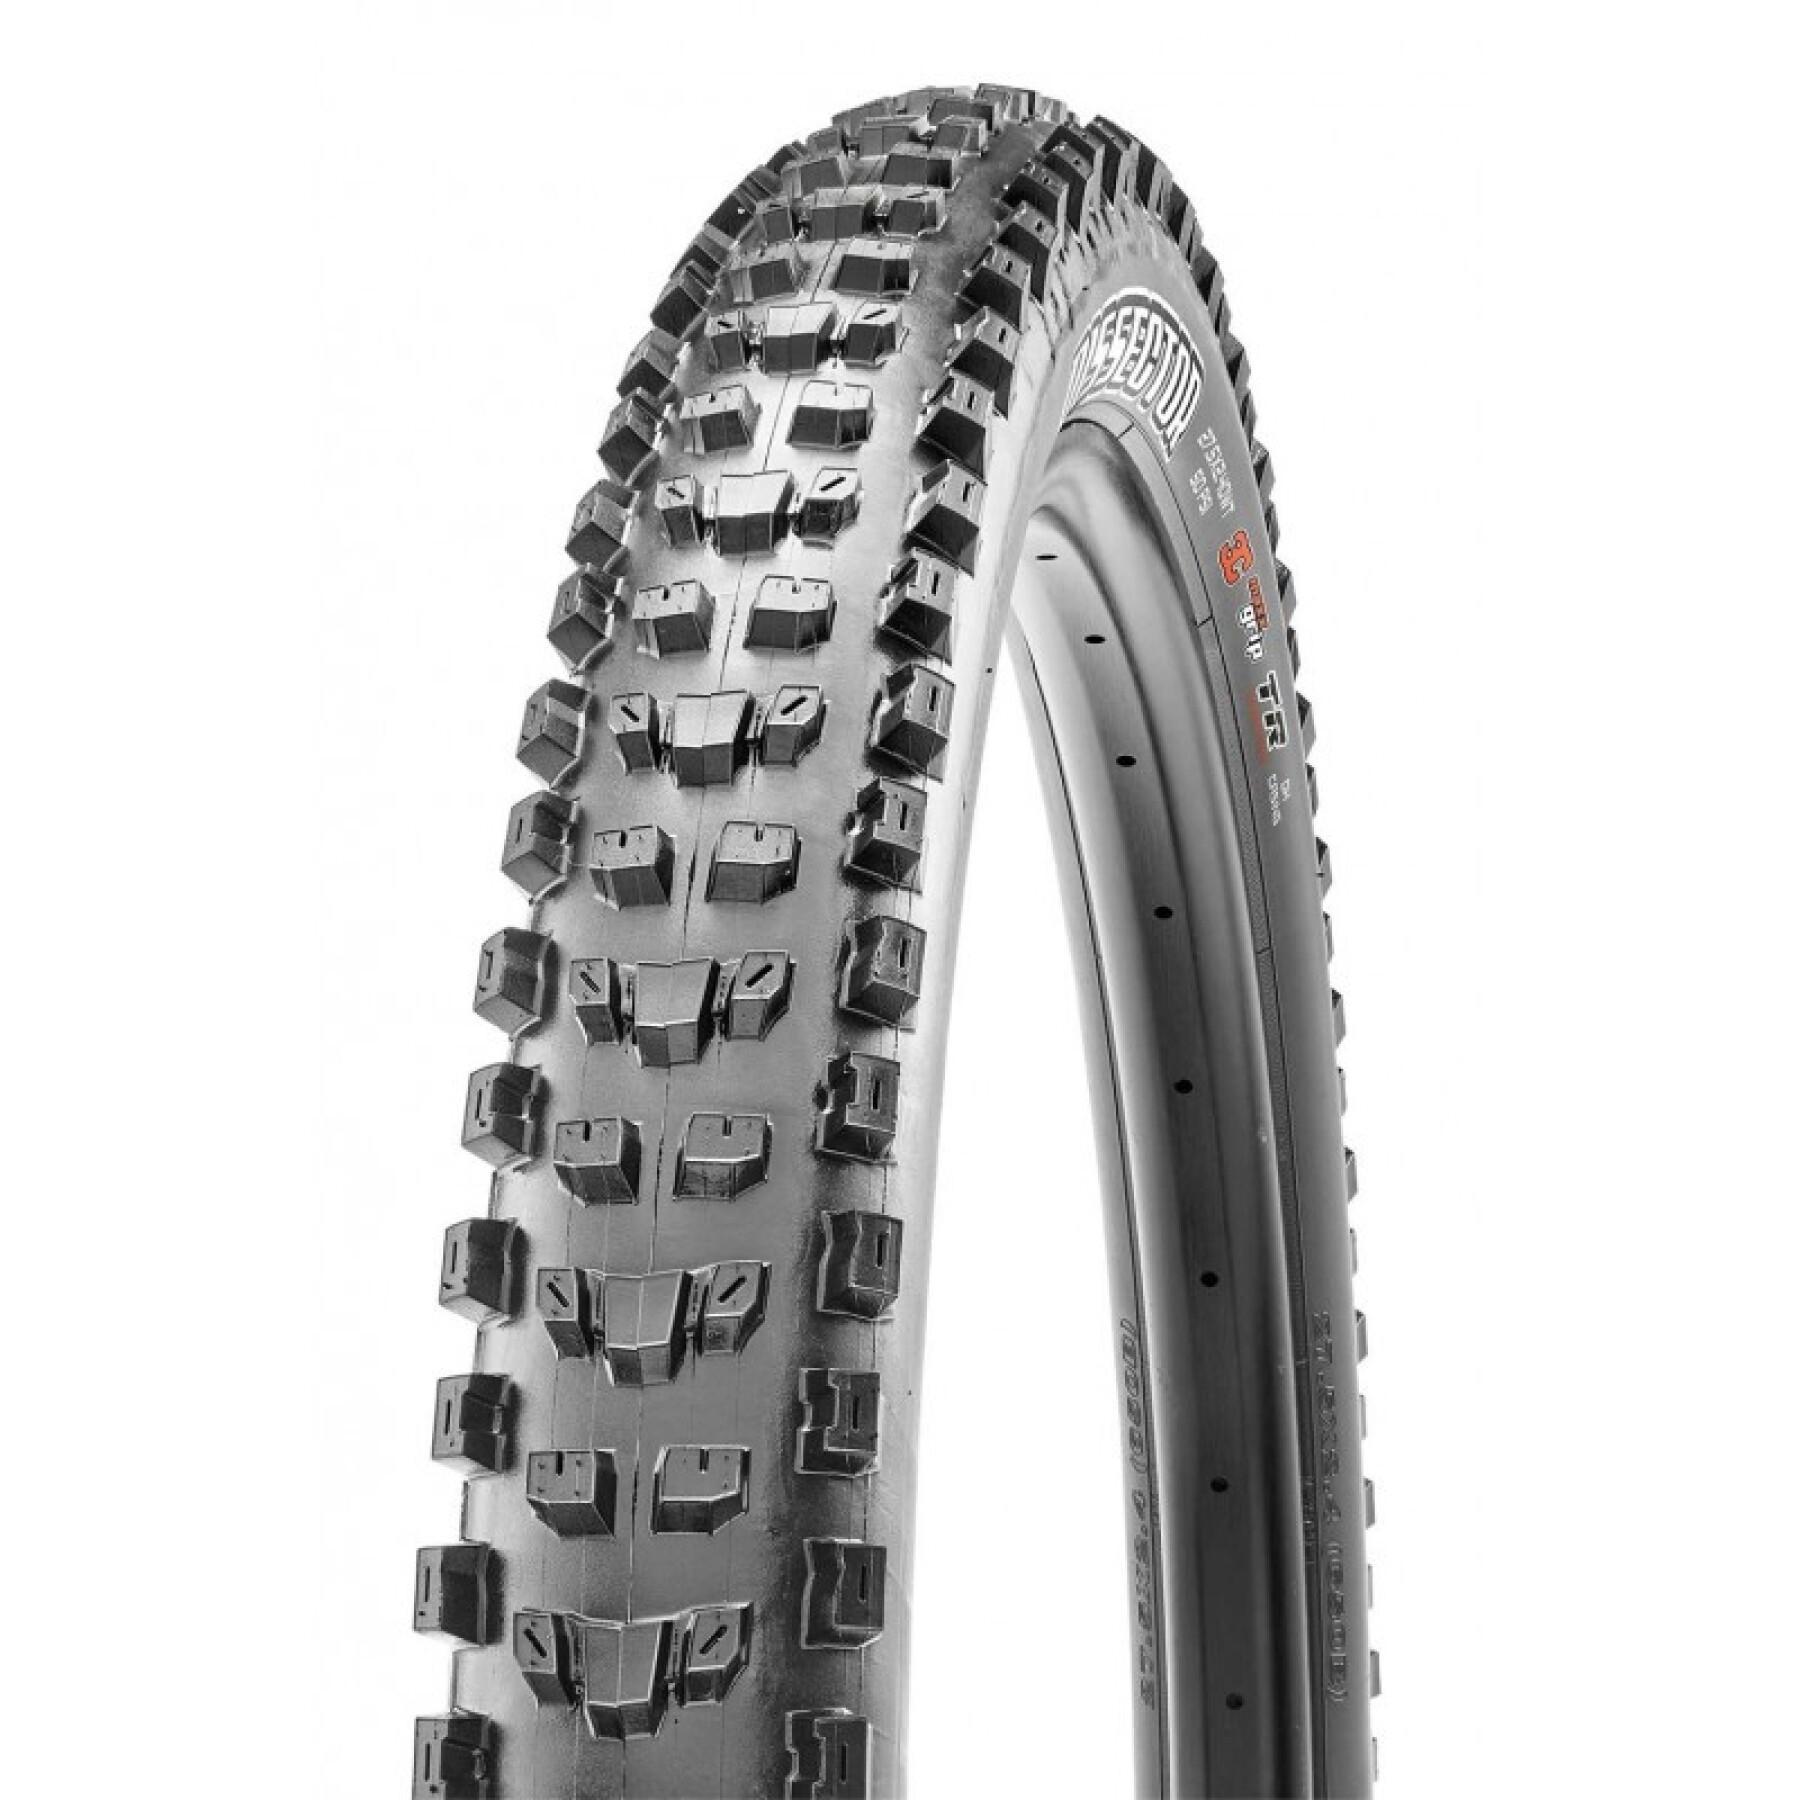 Soft tire Maxxis Dissector (Wide Trail) - tr. souple - 3C Terra / Exo + / Tubeless Ready